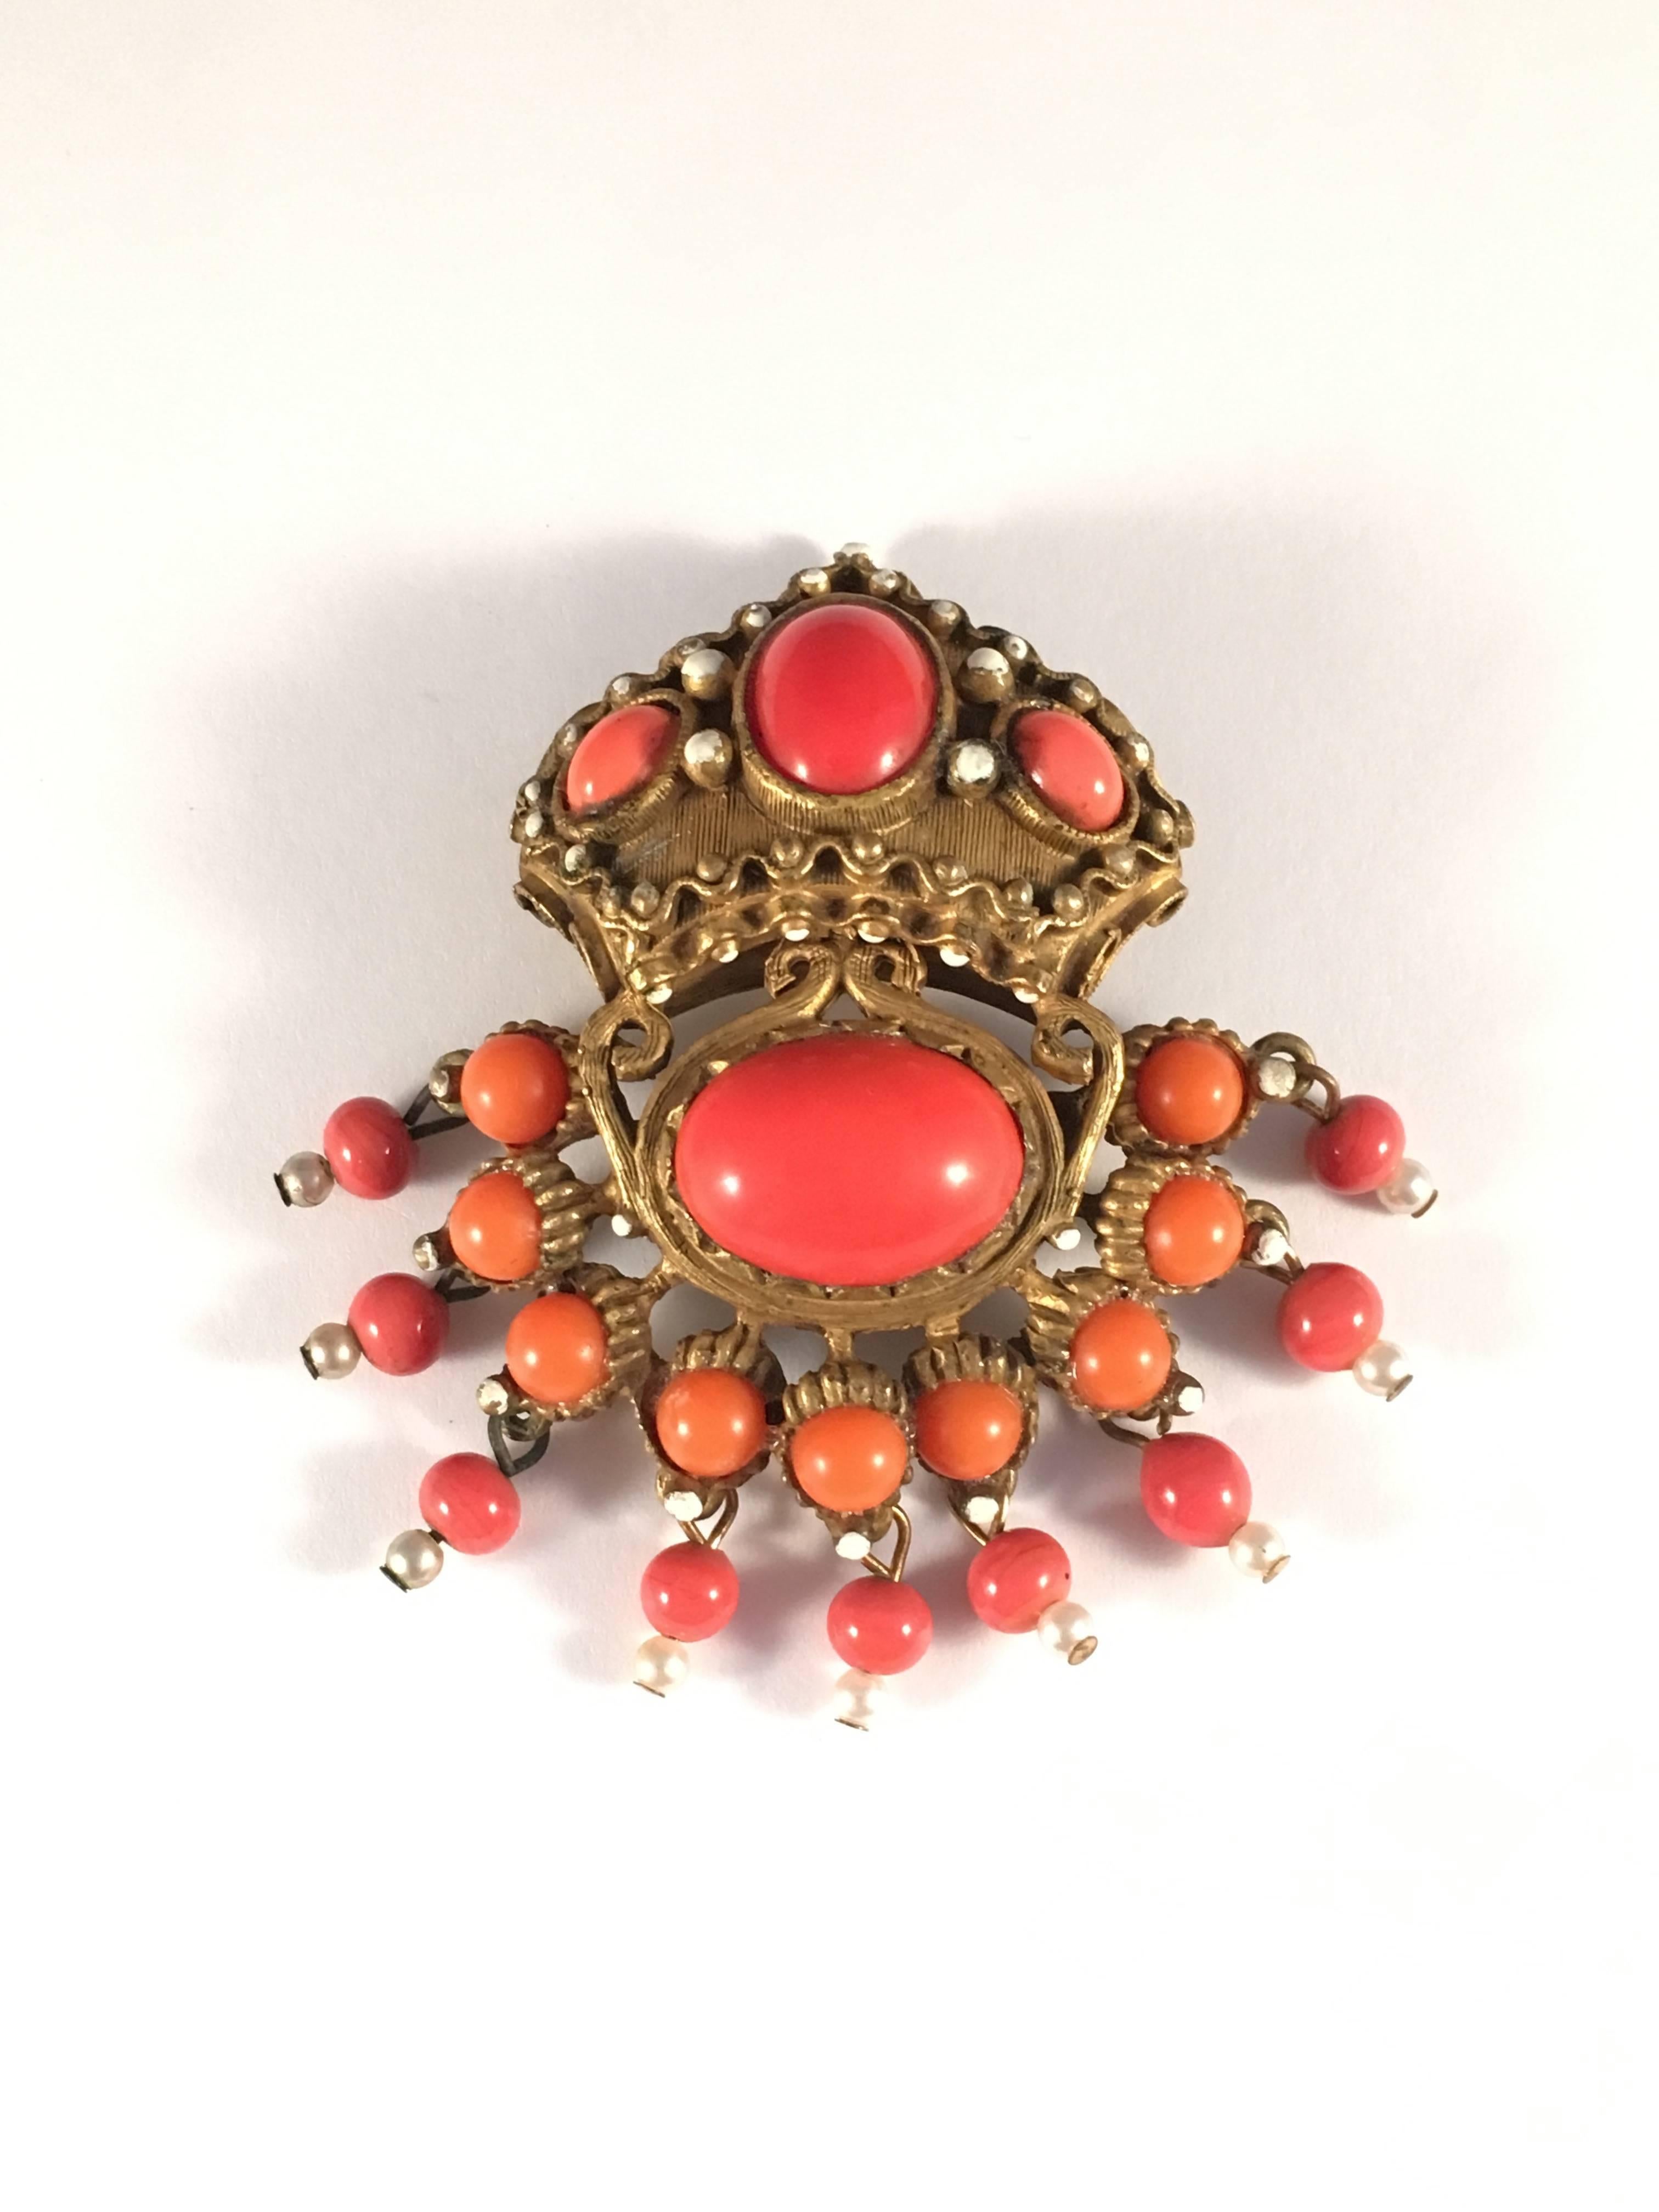 Women's or Men's Kenneth Jay Lane Coral Colored Brooch and Earring Set 1960s